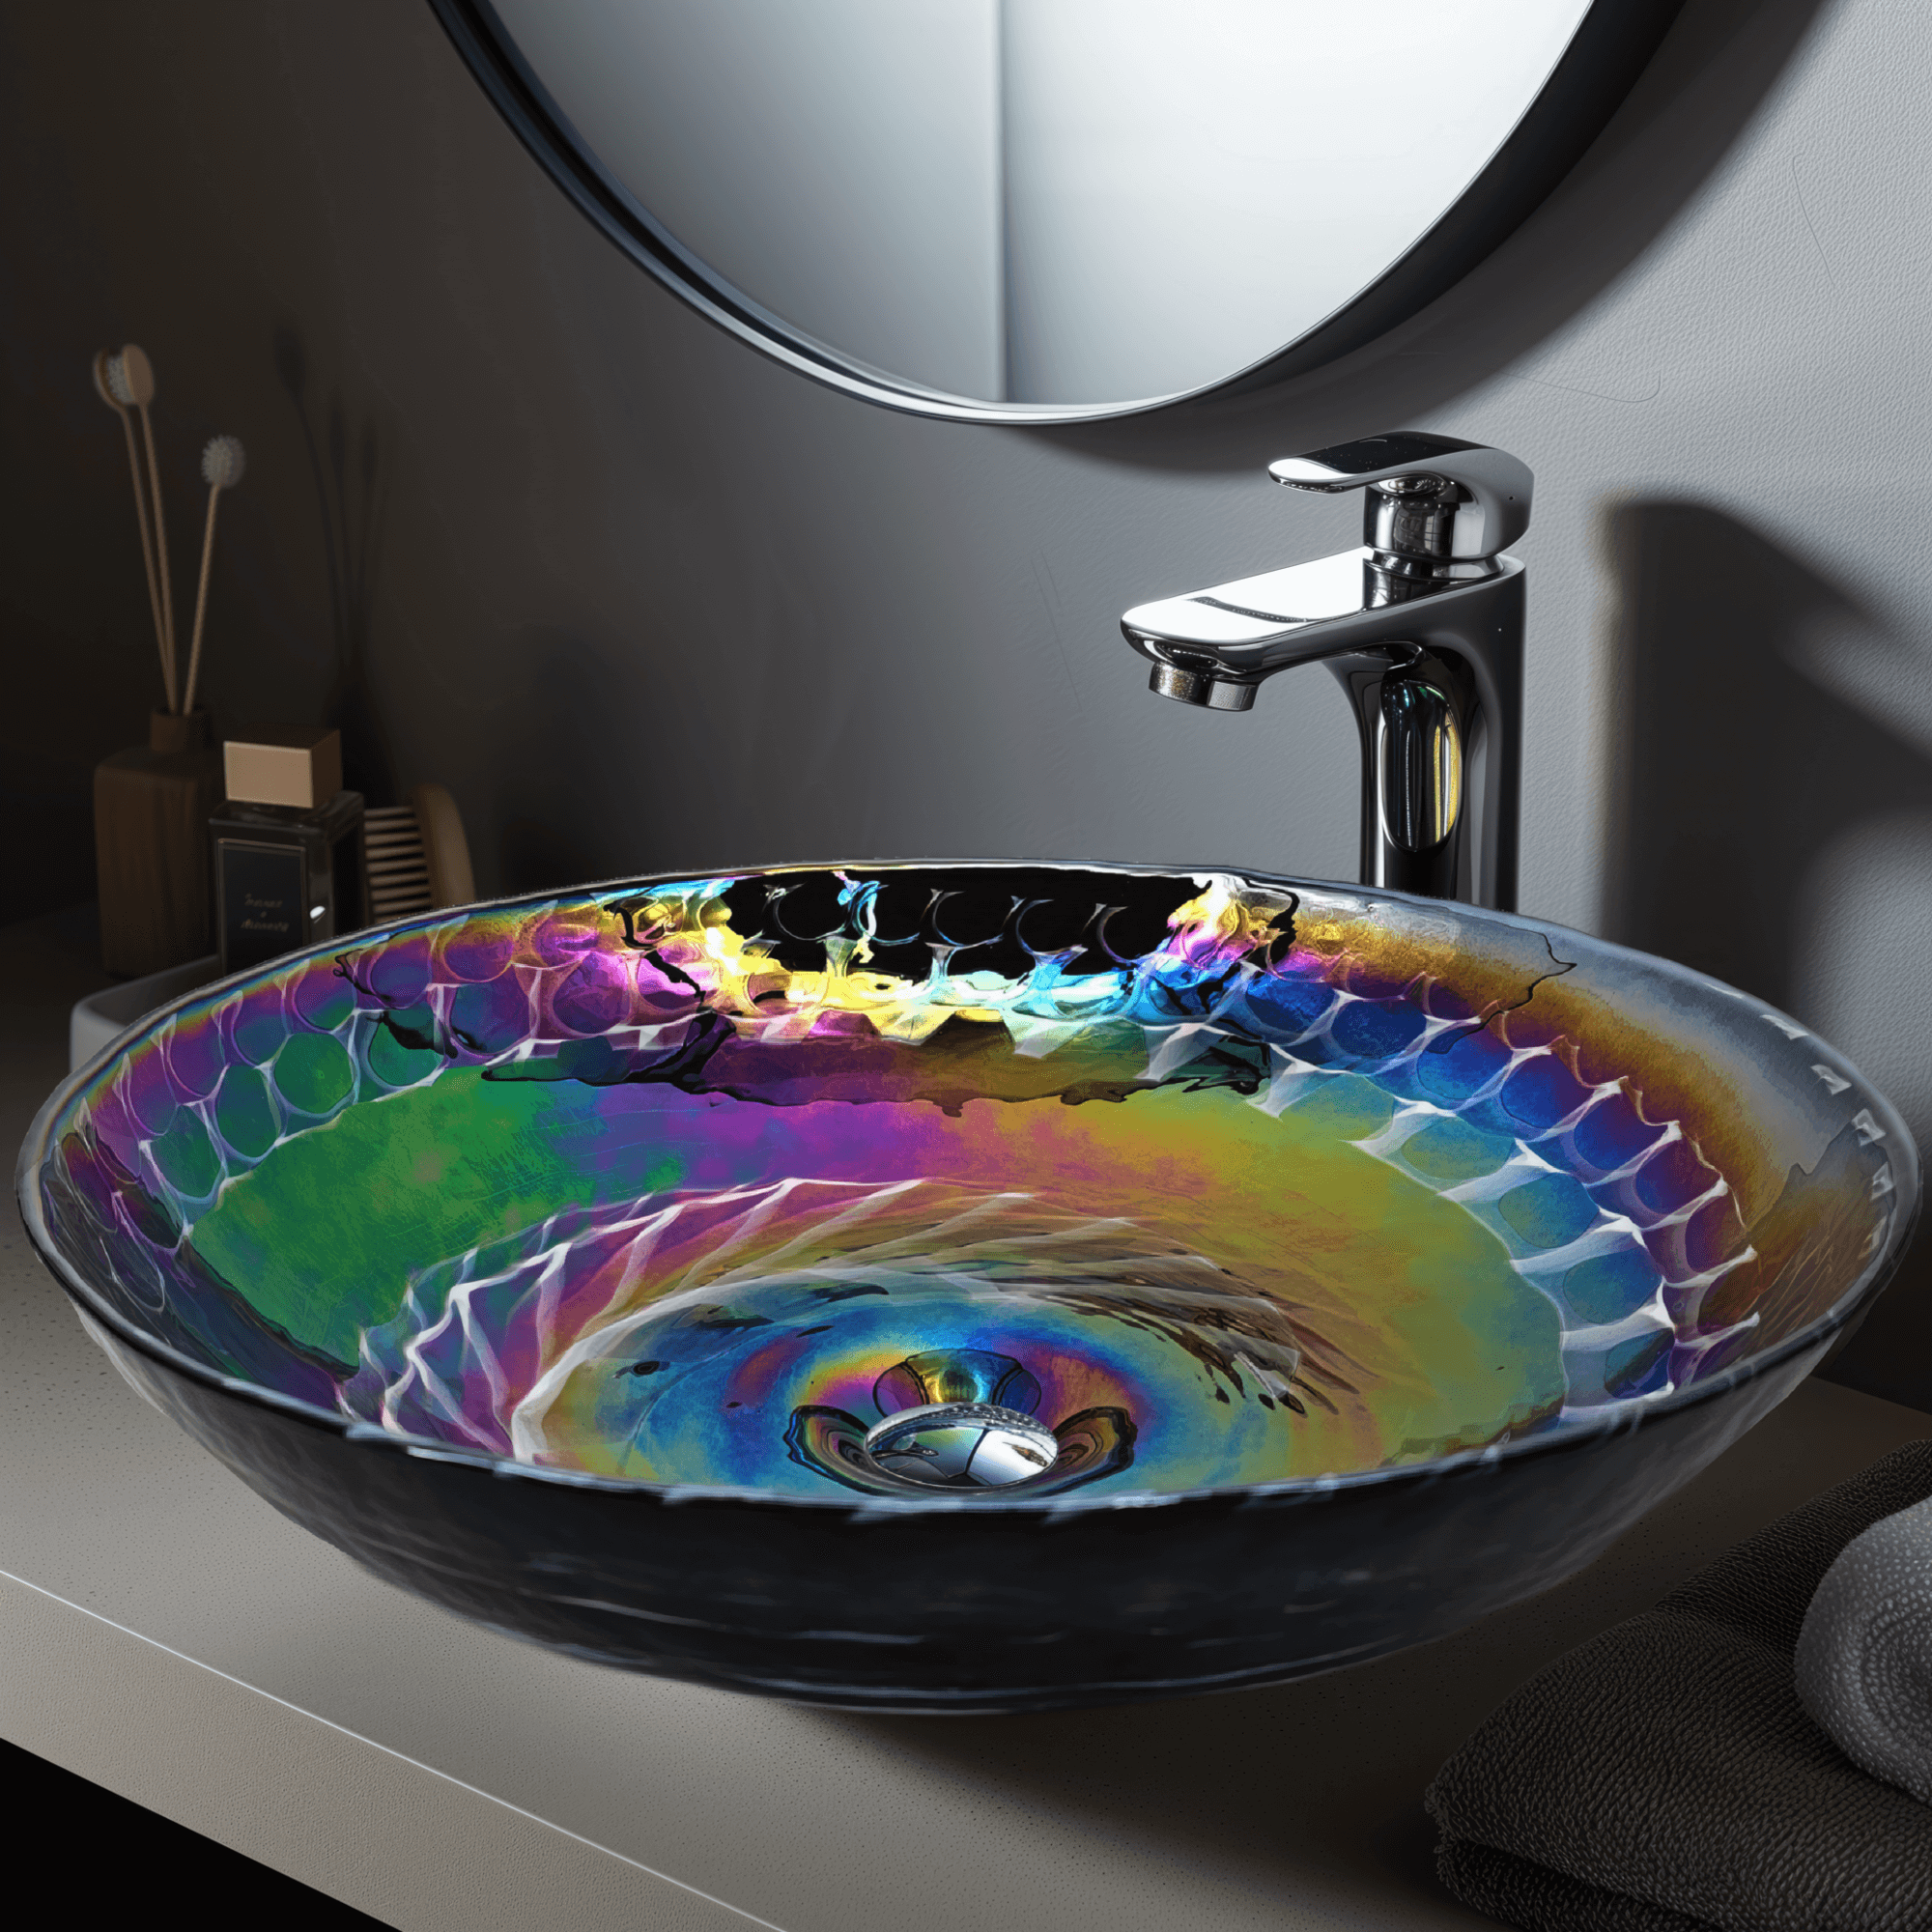 Buy VIGO Vessel Bathroom Sink Pop-Up Drain And Mounting Ring at the price  of $ 42.00 from the manufacturer